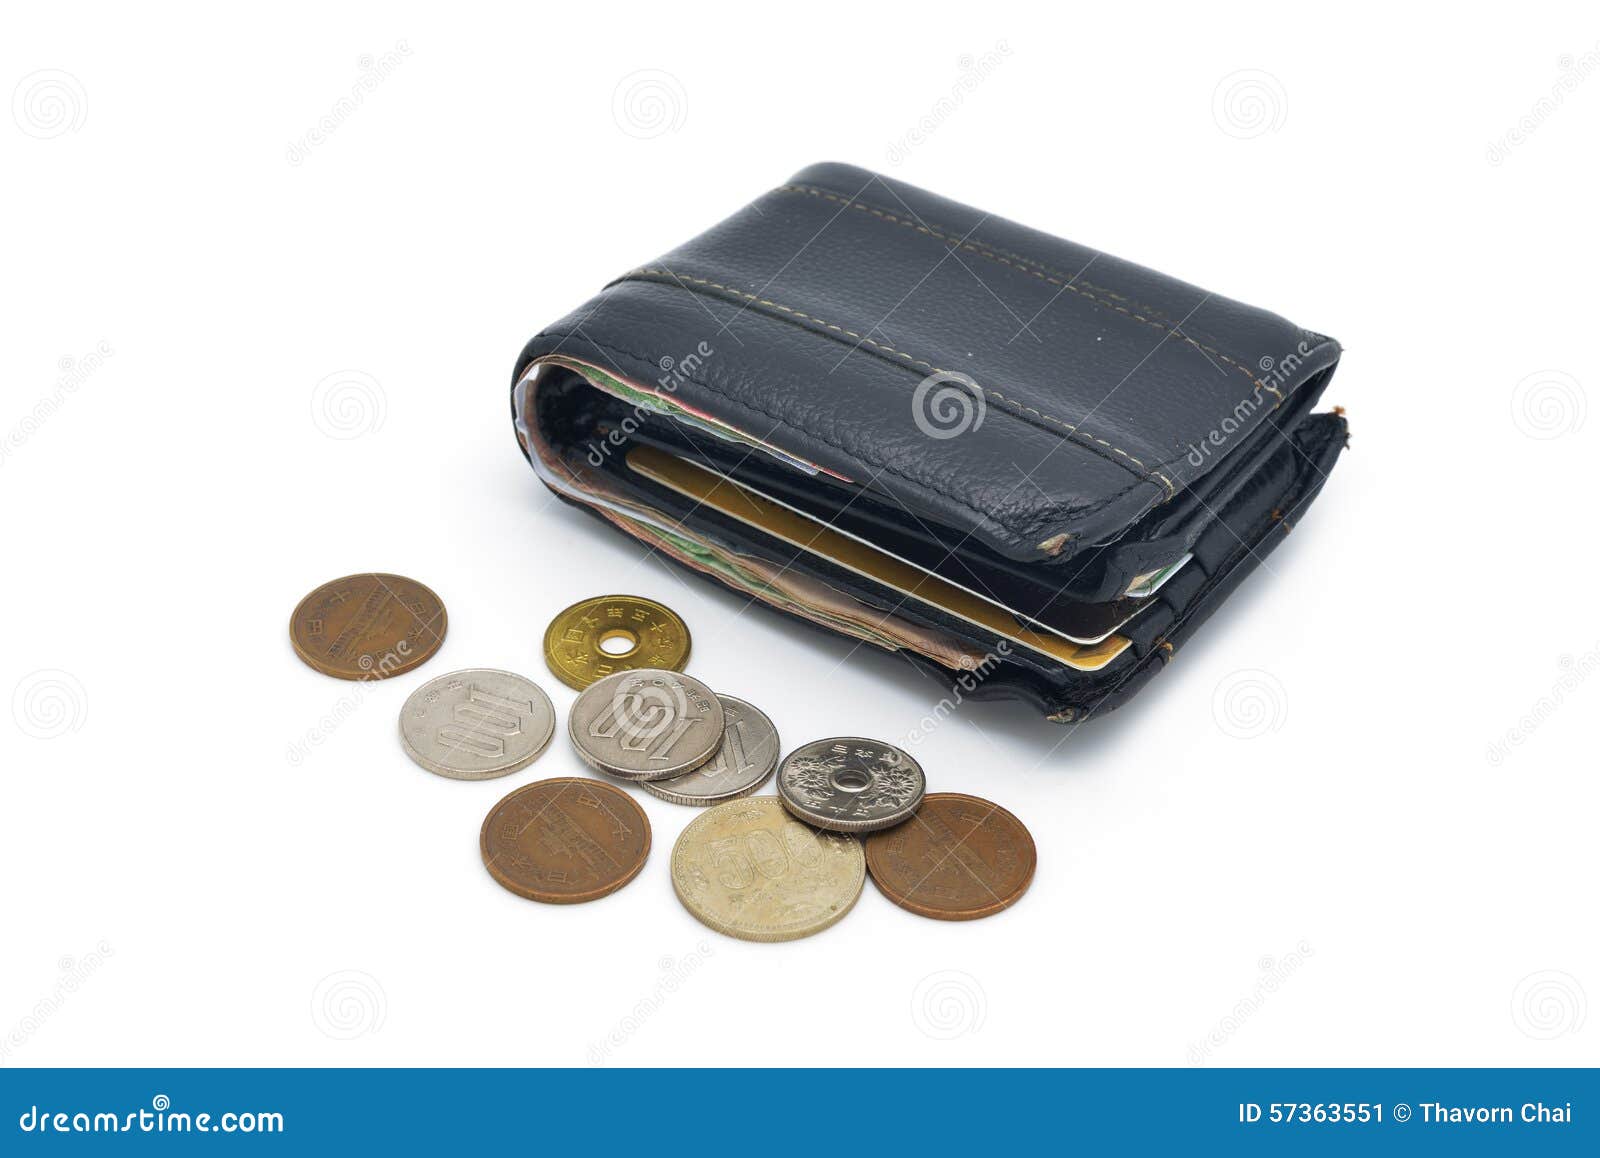 Isolated Old Used Leather Wallet And Coins Stock Image - Image of funds, business: 57363551